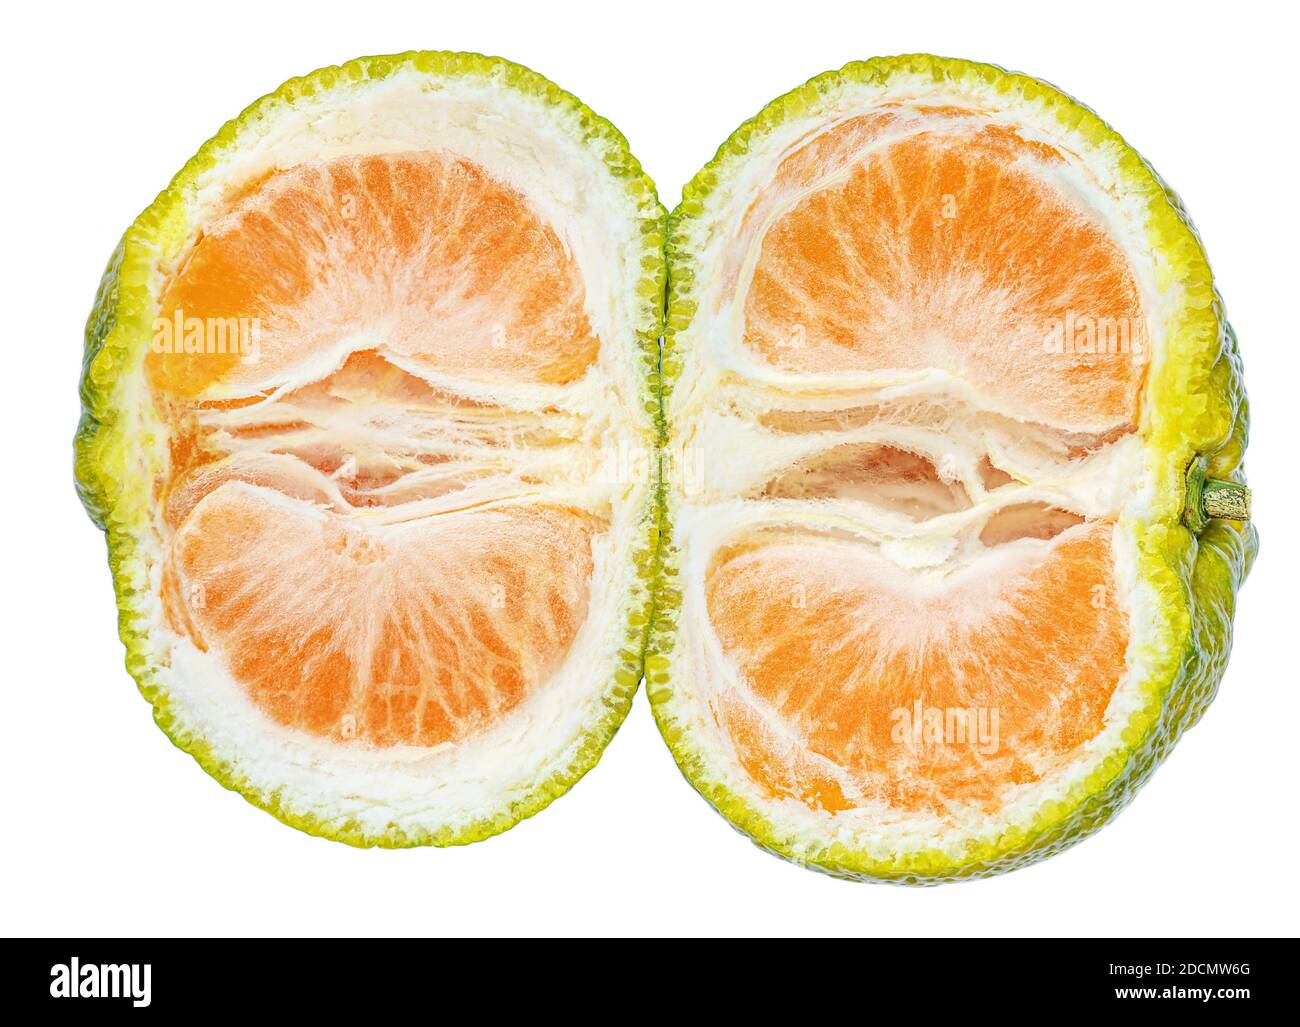 Tangerine or clementine fruit  slice with citrus peel  isolated on white background Stock Photo